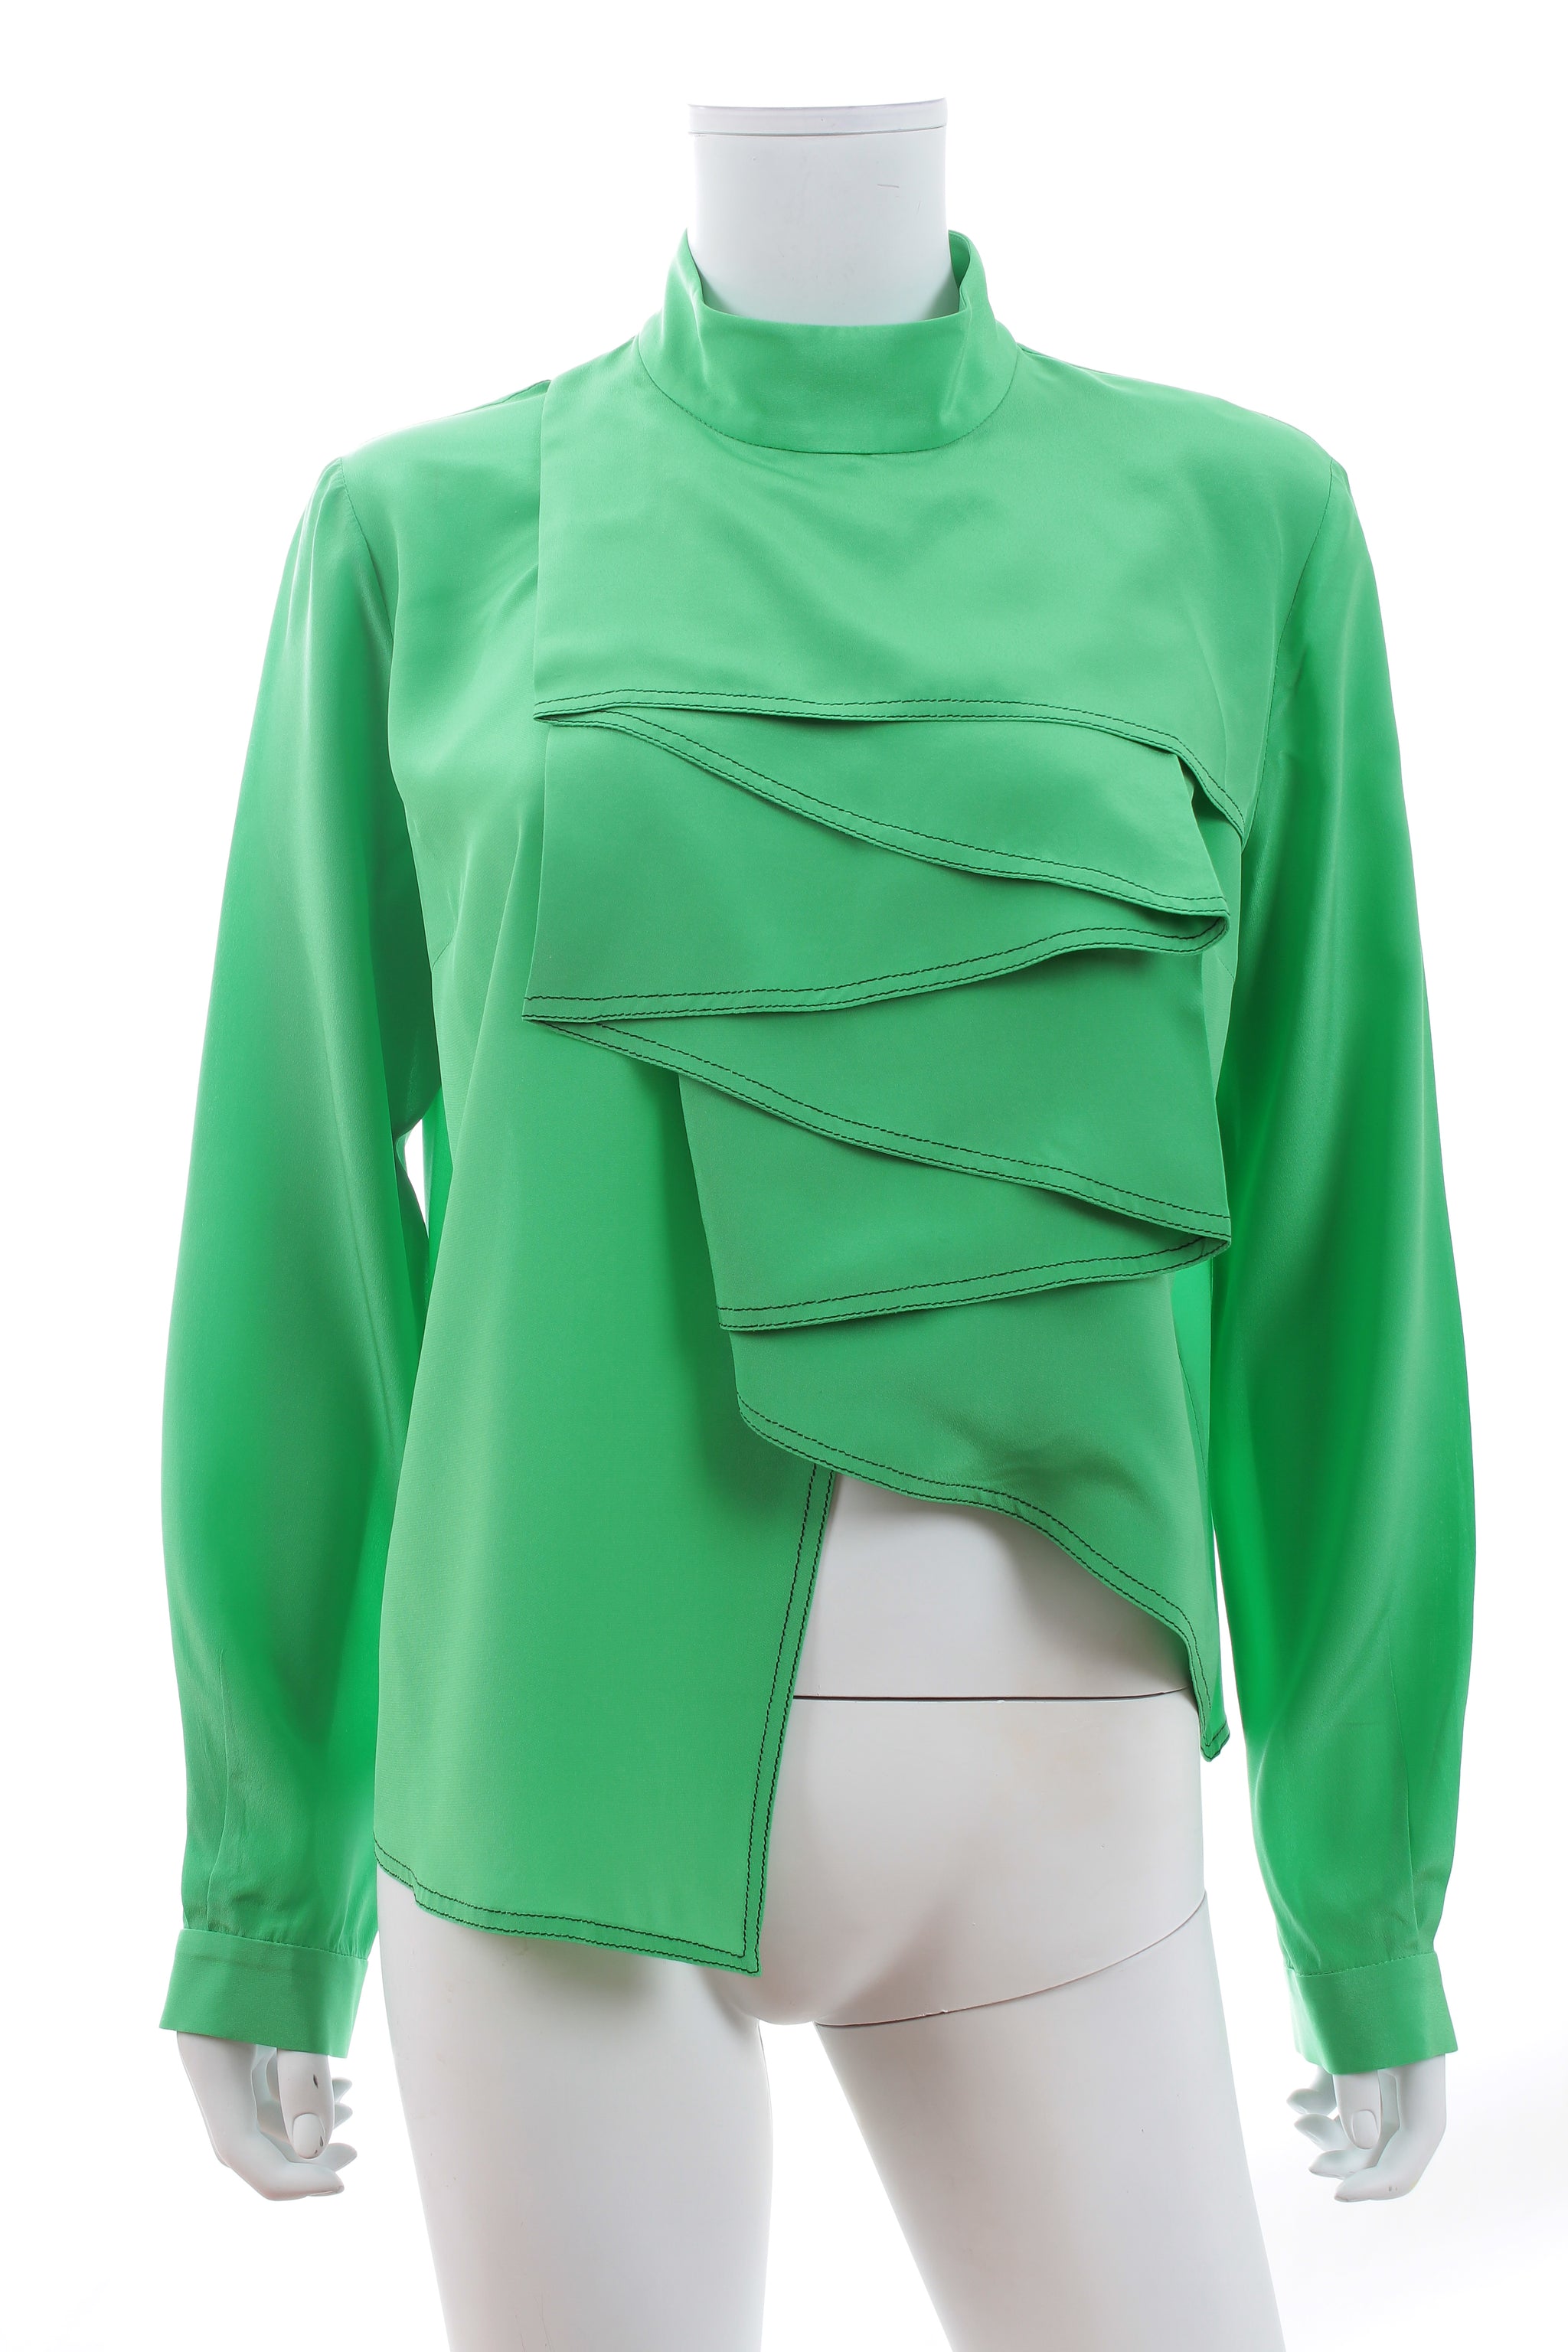 See by Chloe Ruffle-Trimmed Printed Cotton and Silk-Blend Blouse